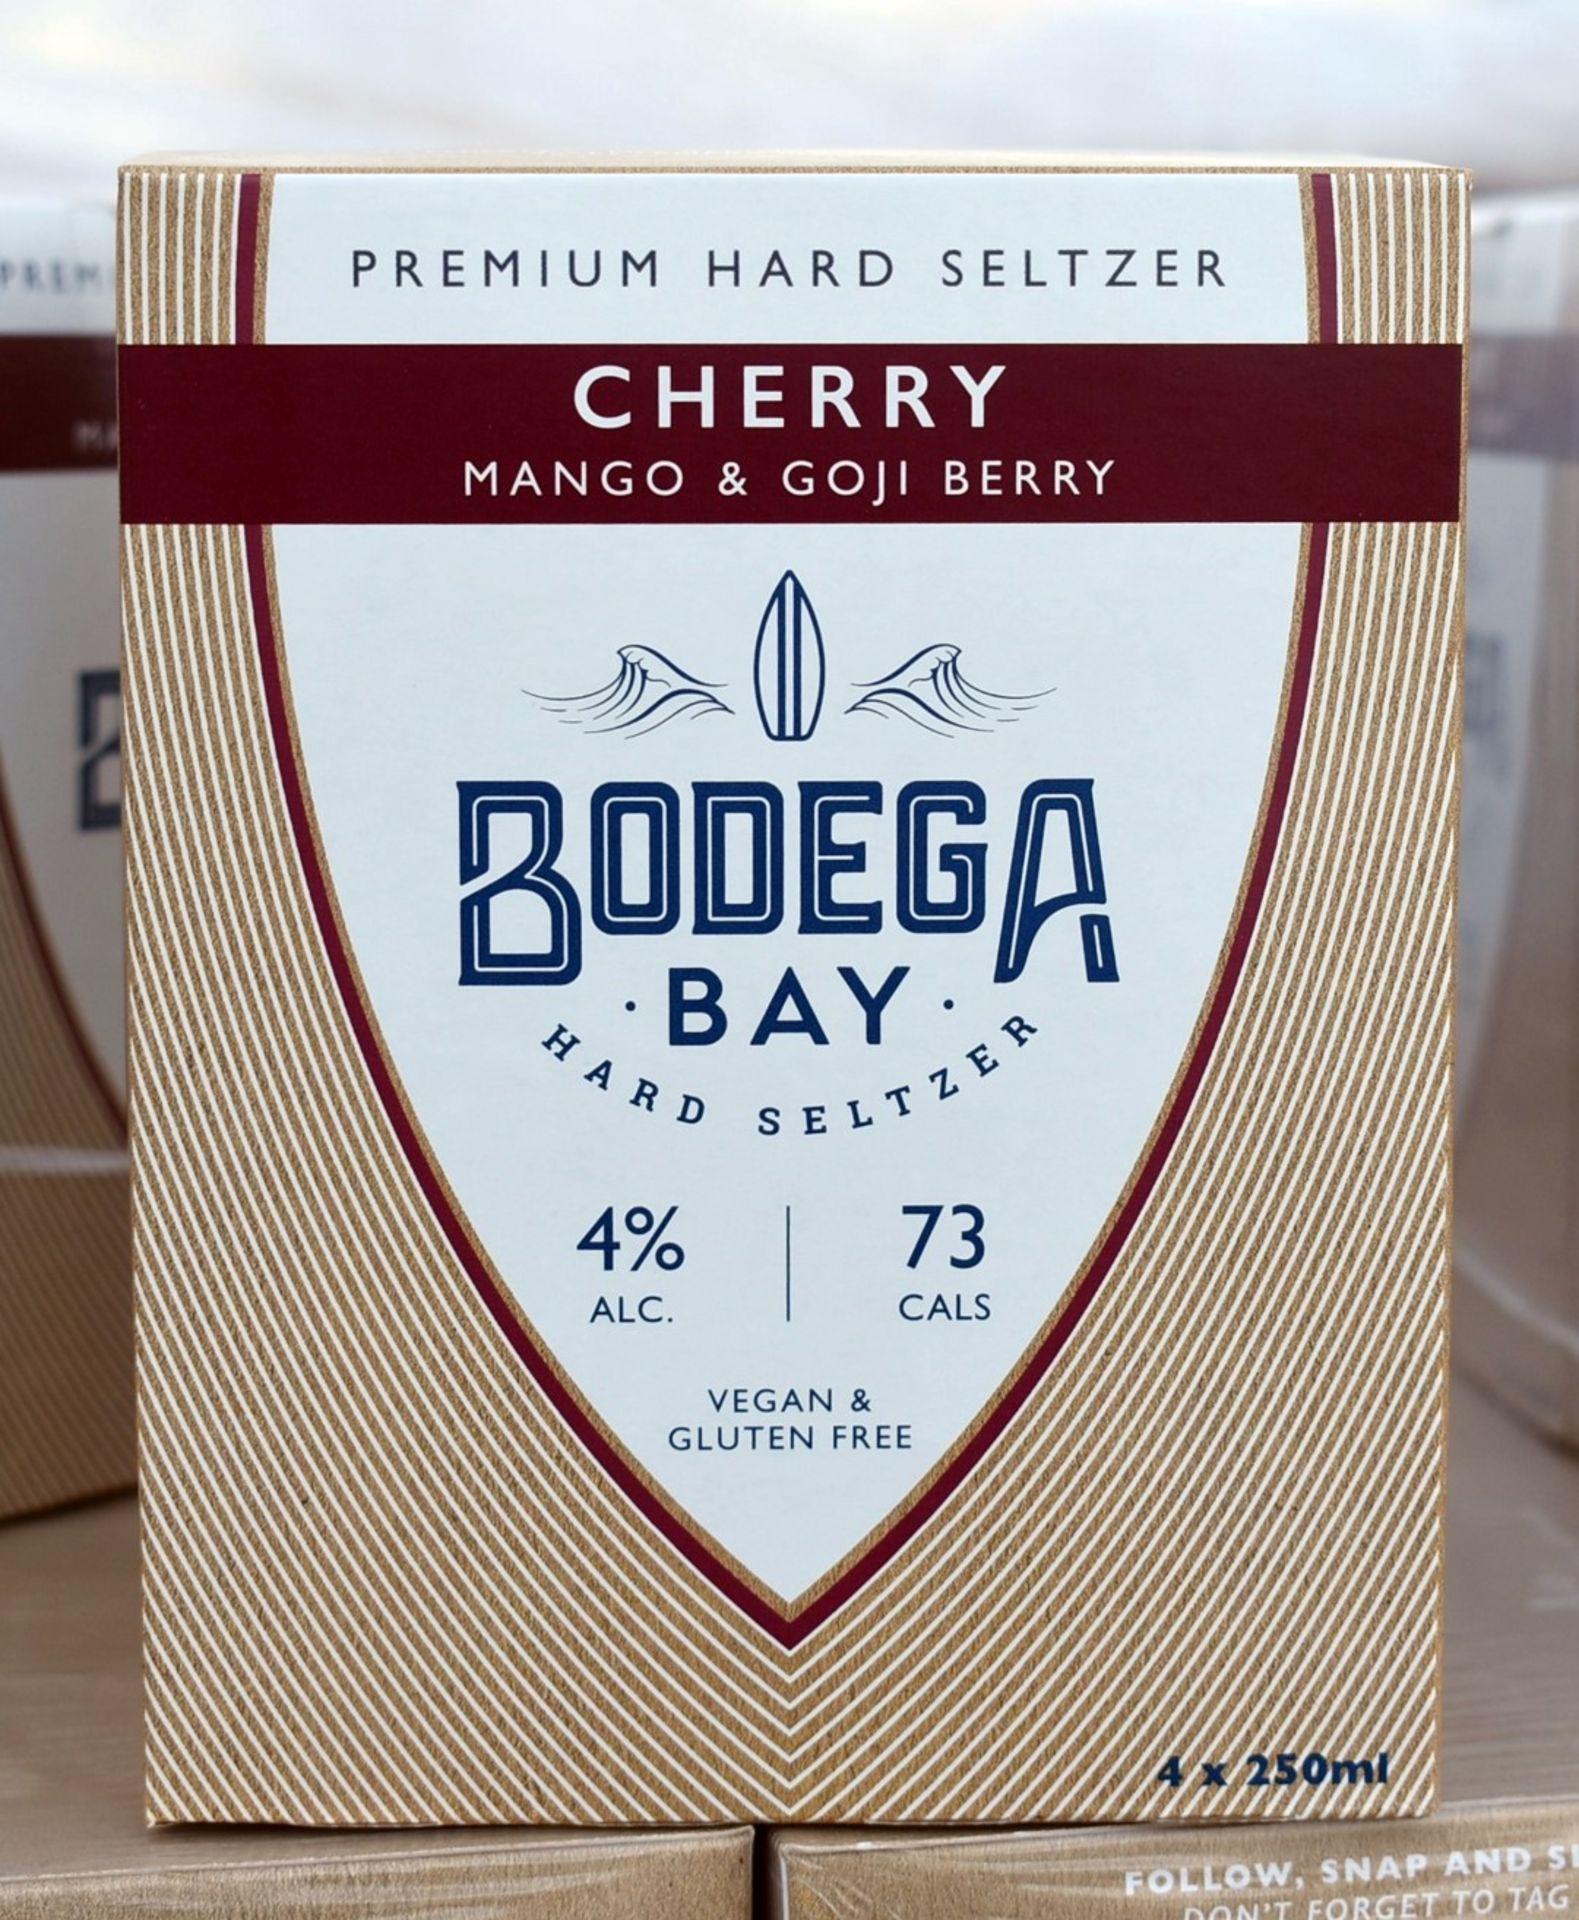 360 x Cans of Bodega Bay Hard Seltzer 250ml Alcoholic Sparkling Water Drinks - Various Flavours - Image 12 of 15